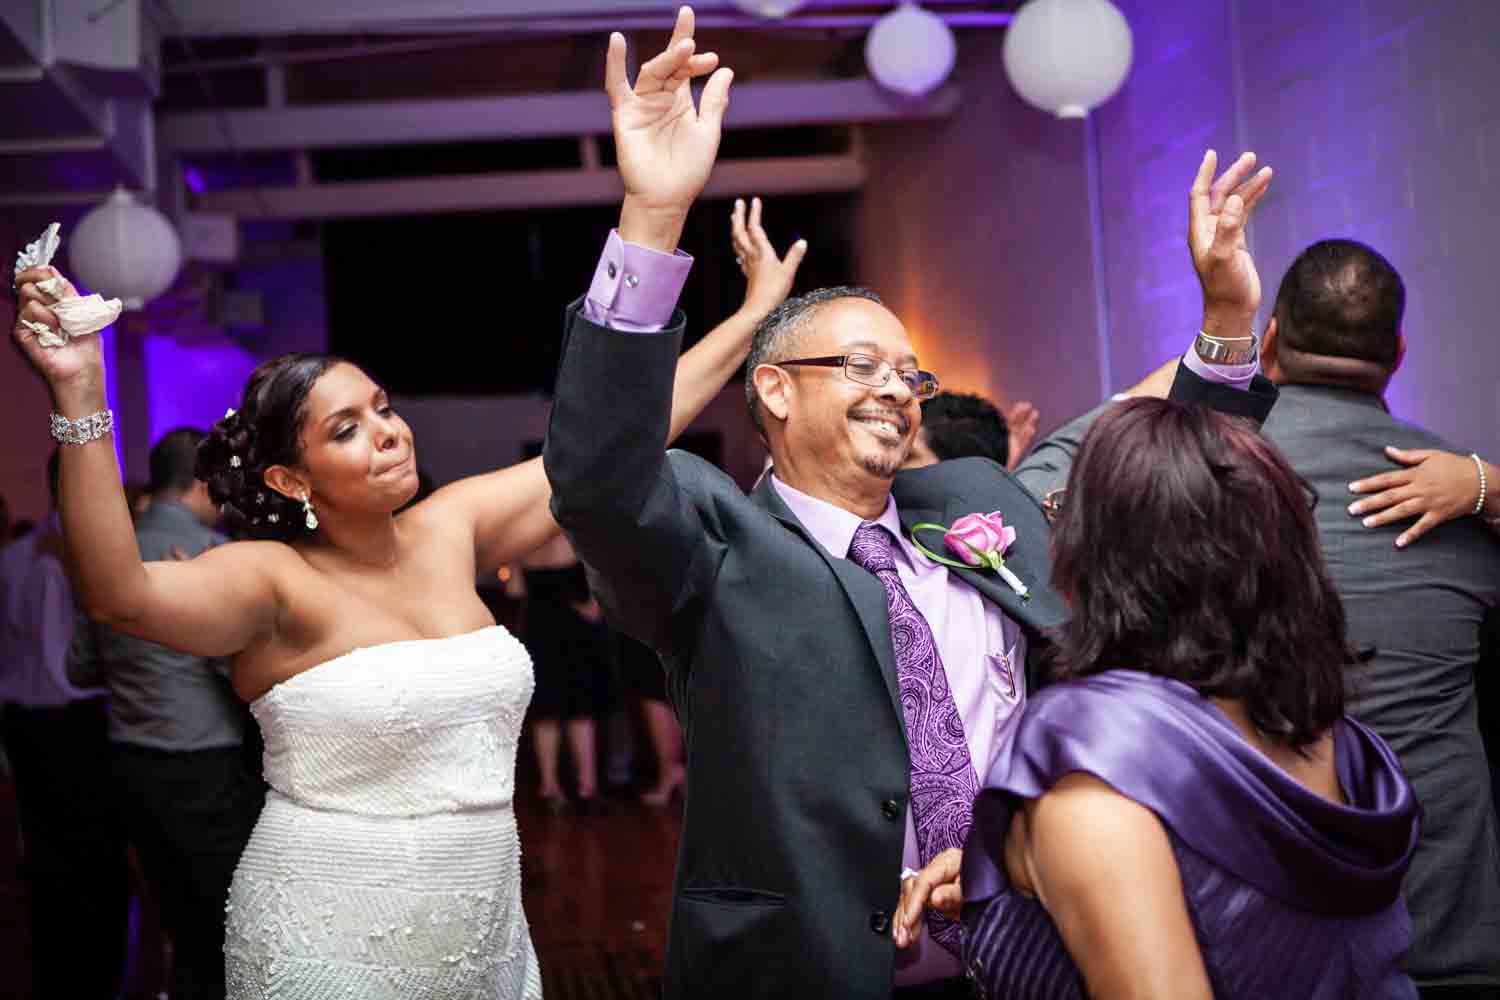 Man dancing in between two women at a wedding reception